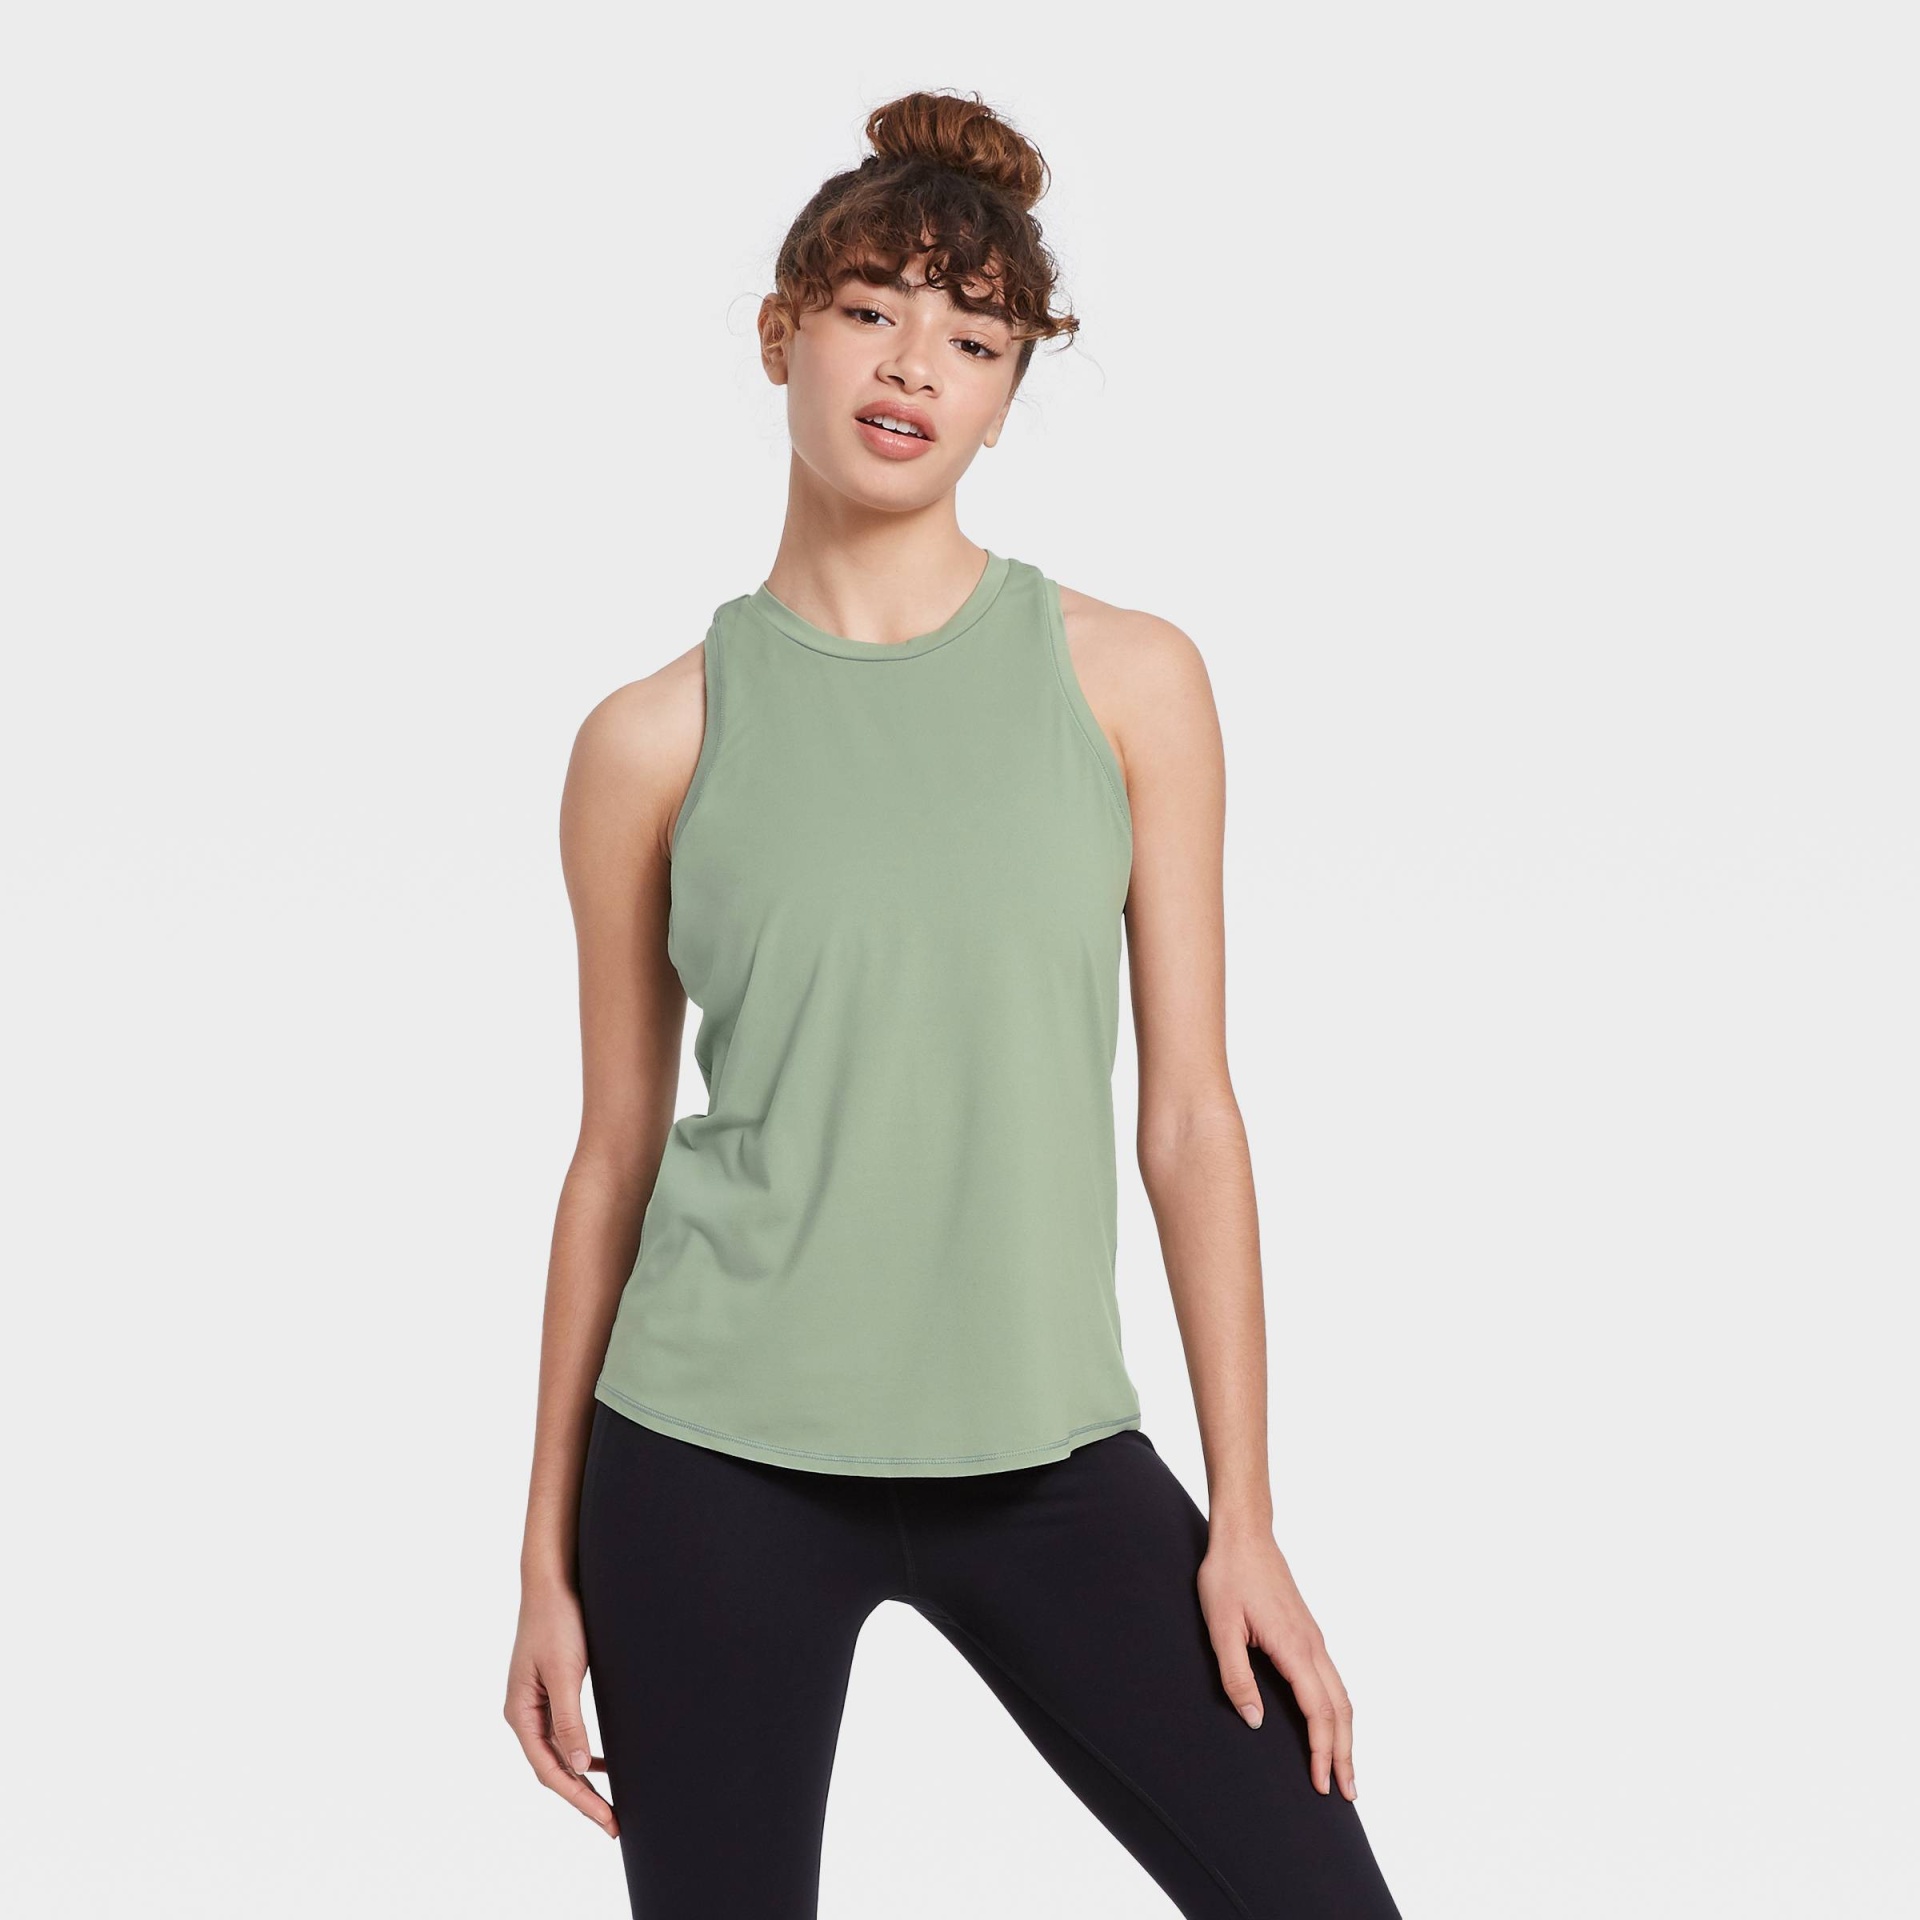 Women's Essential Racerback Tank Top - All in Motion Soft Sage XL